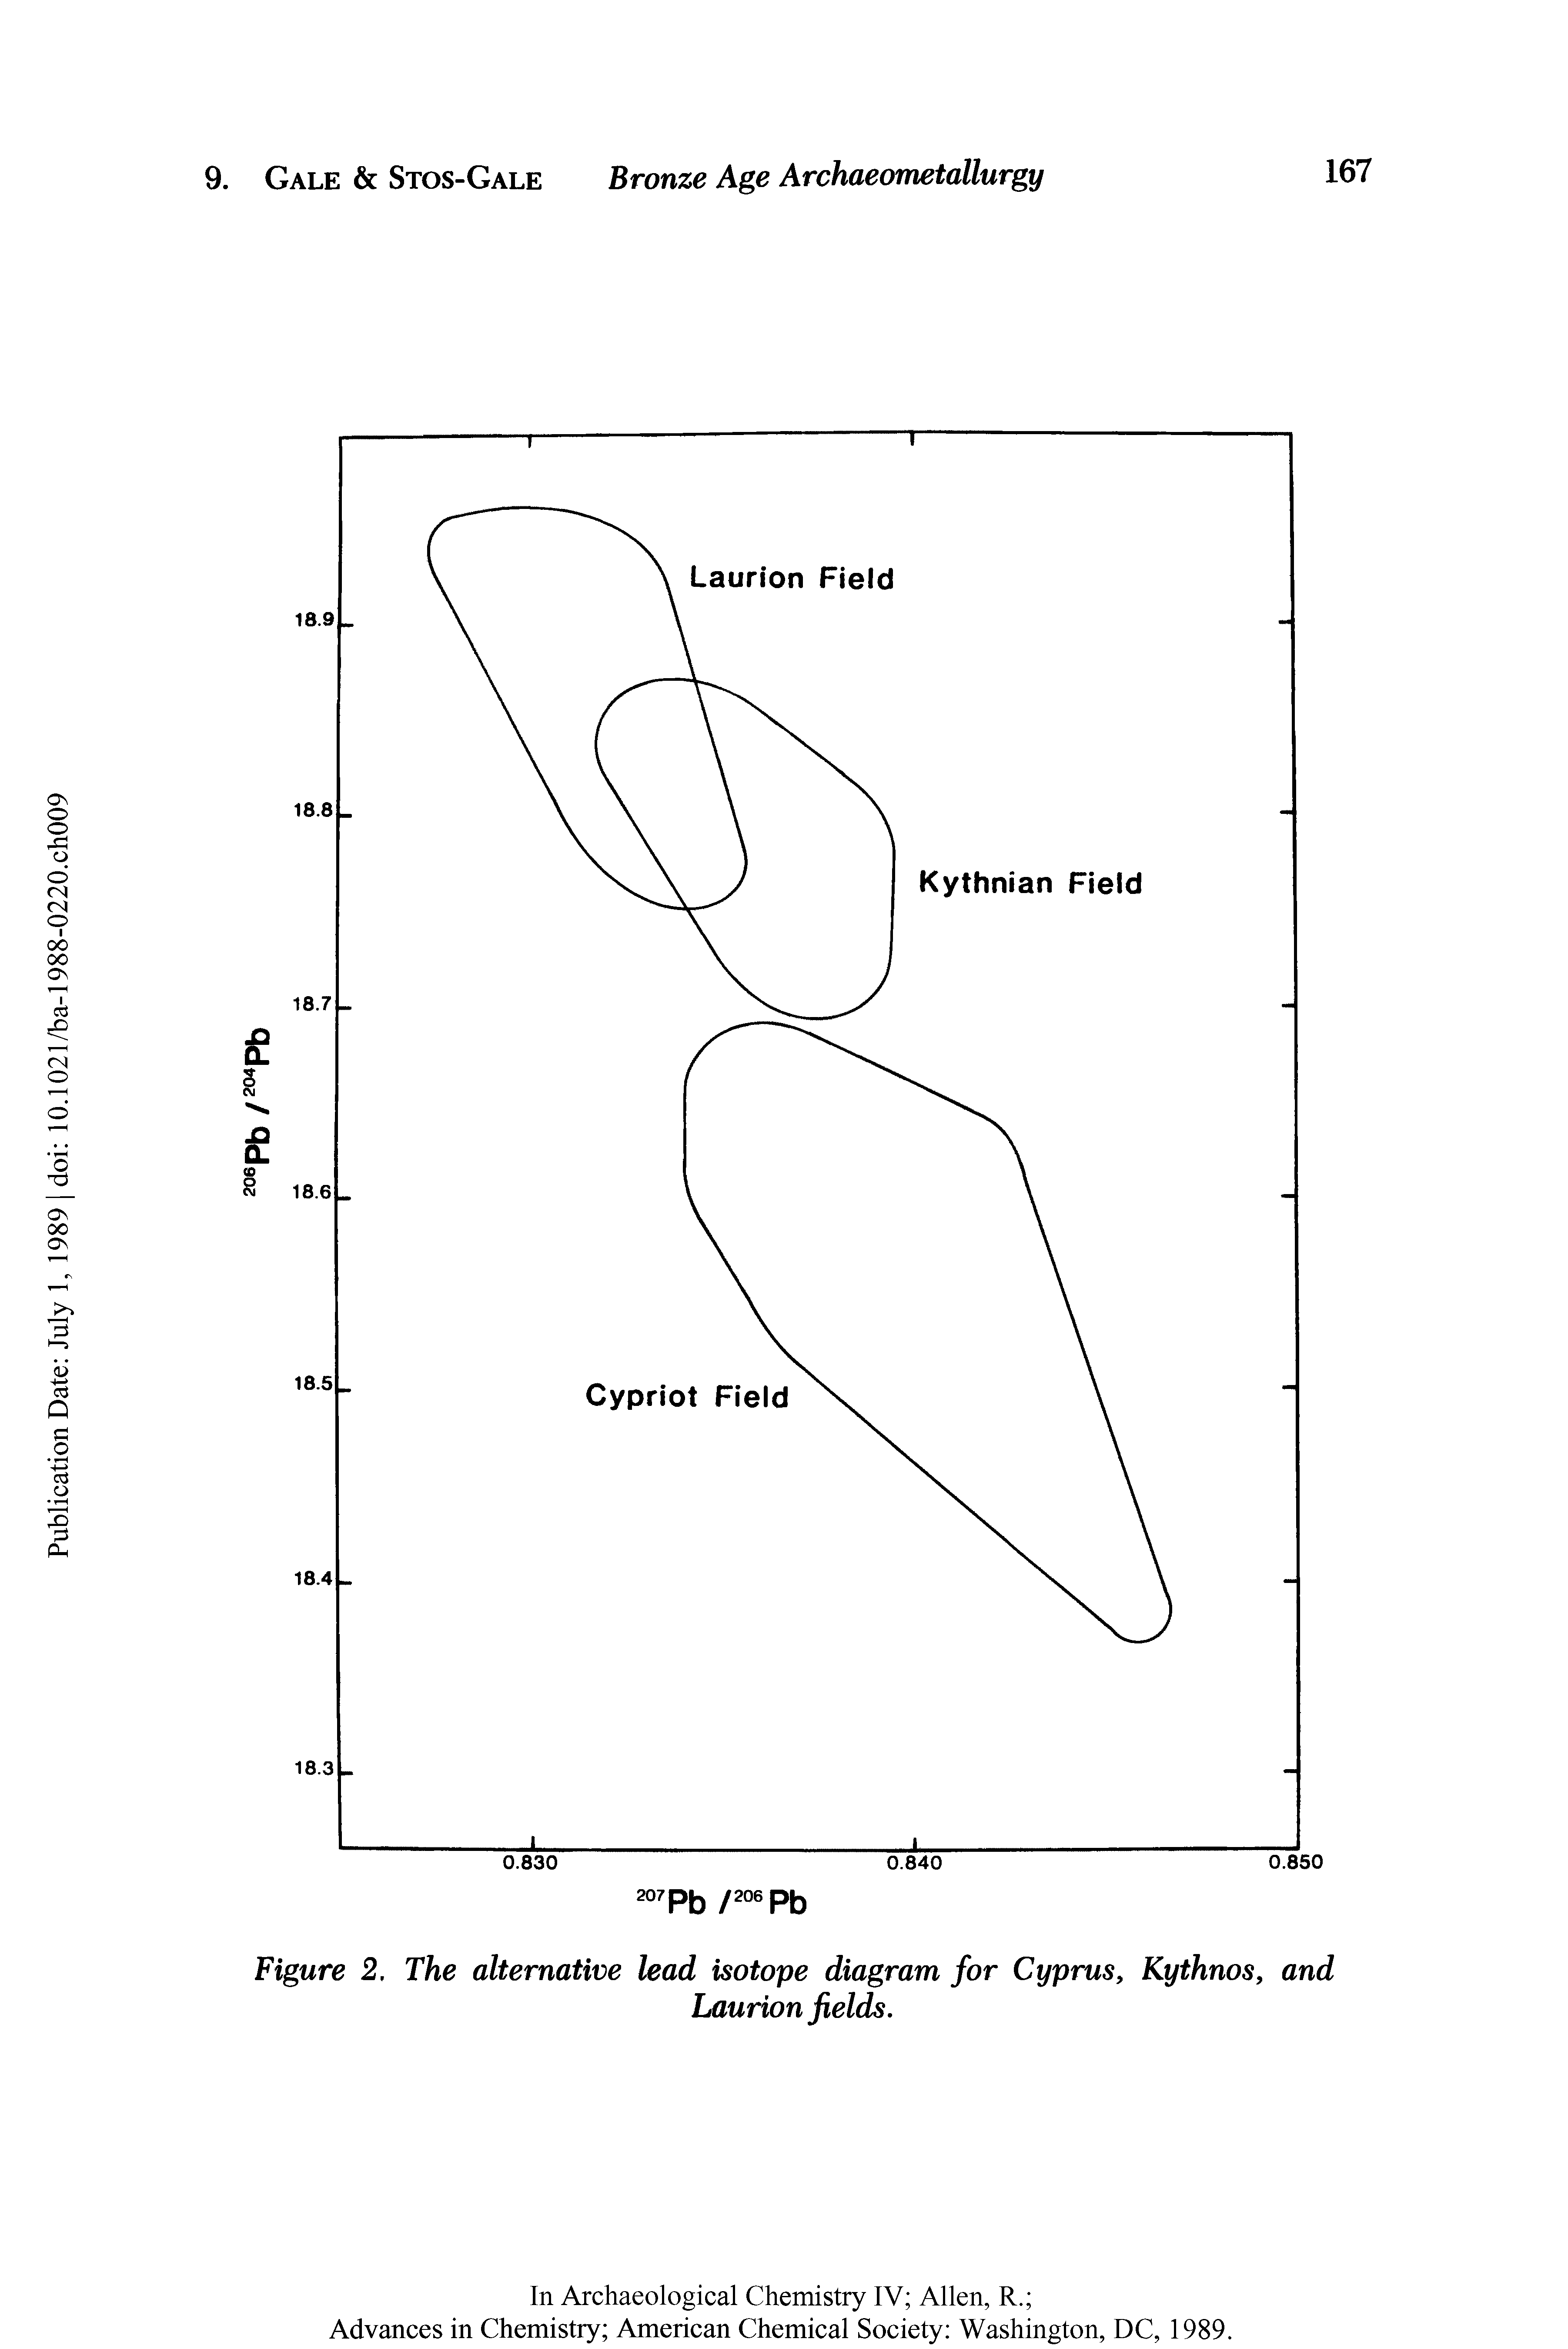 Figure 2, The alternative lead isotope diagram for Cyprus, Kythnos, and...